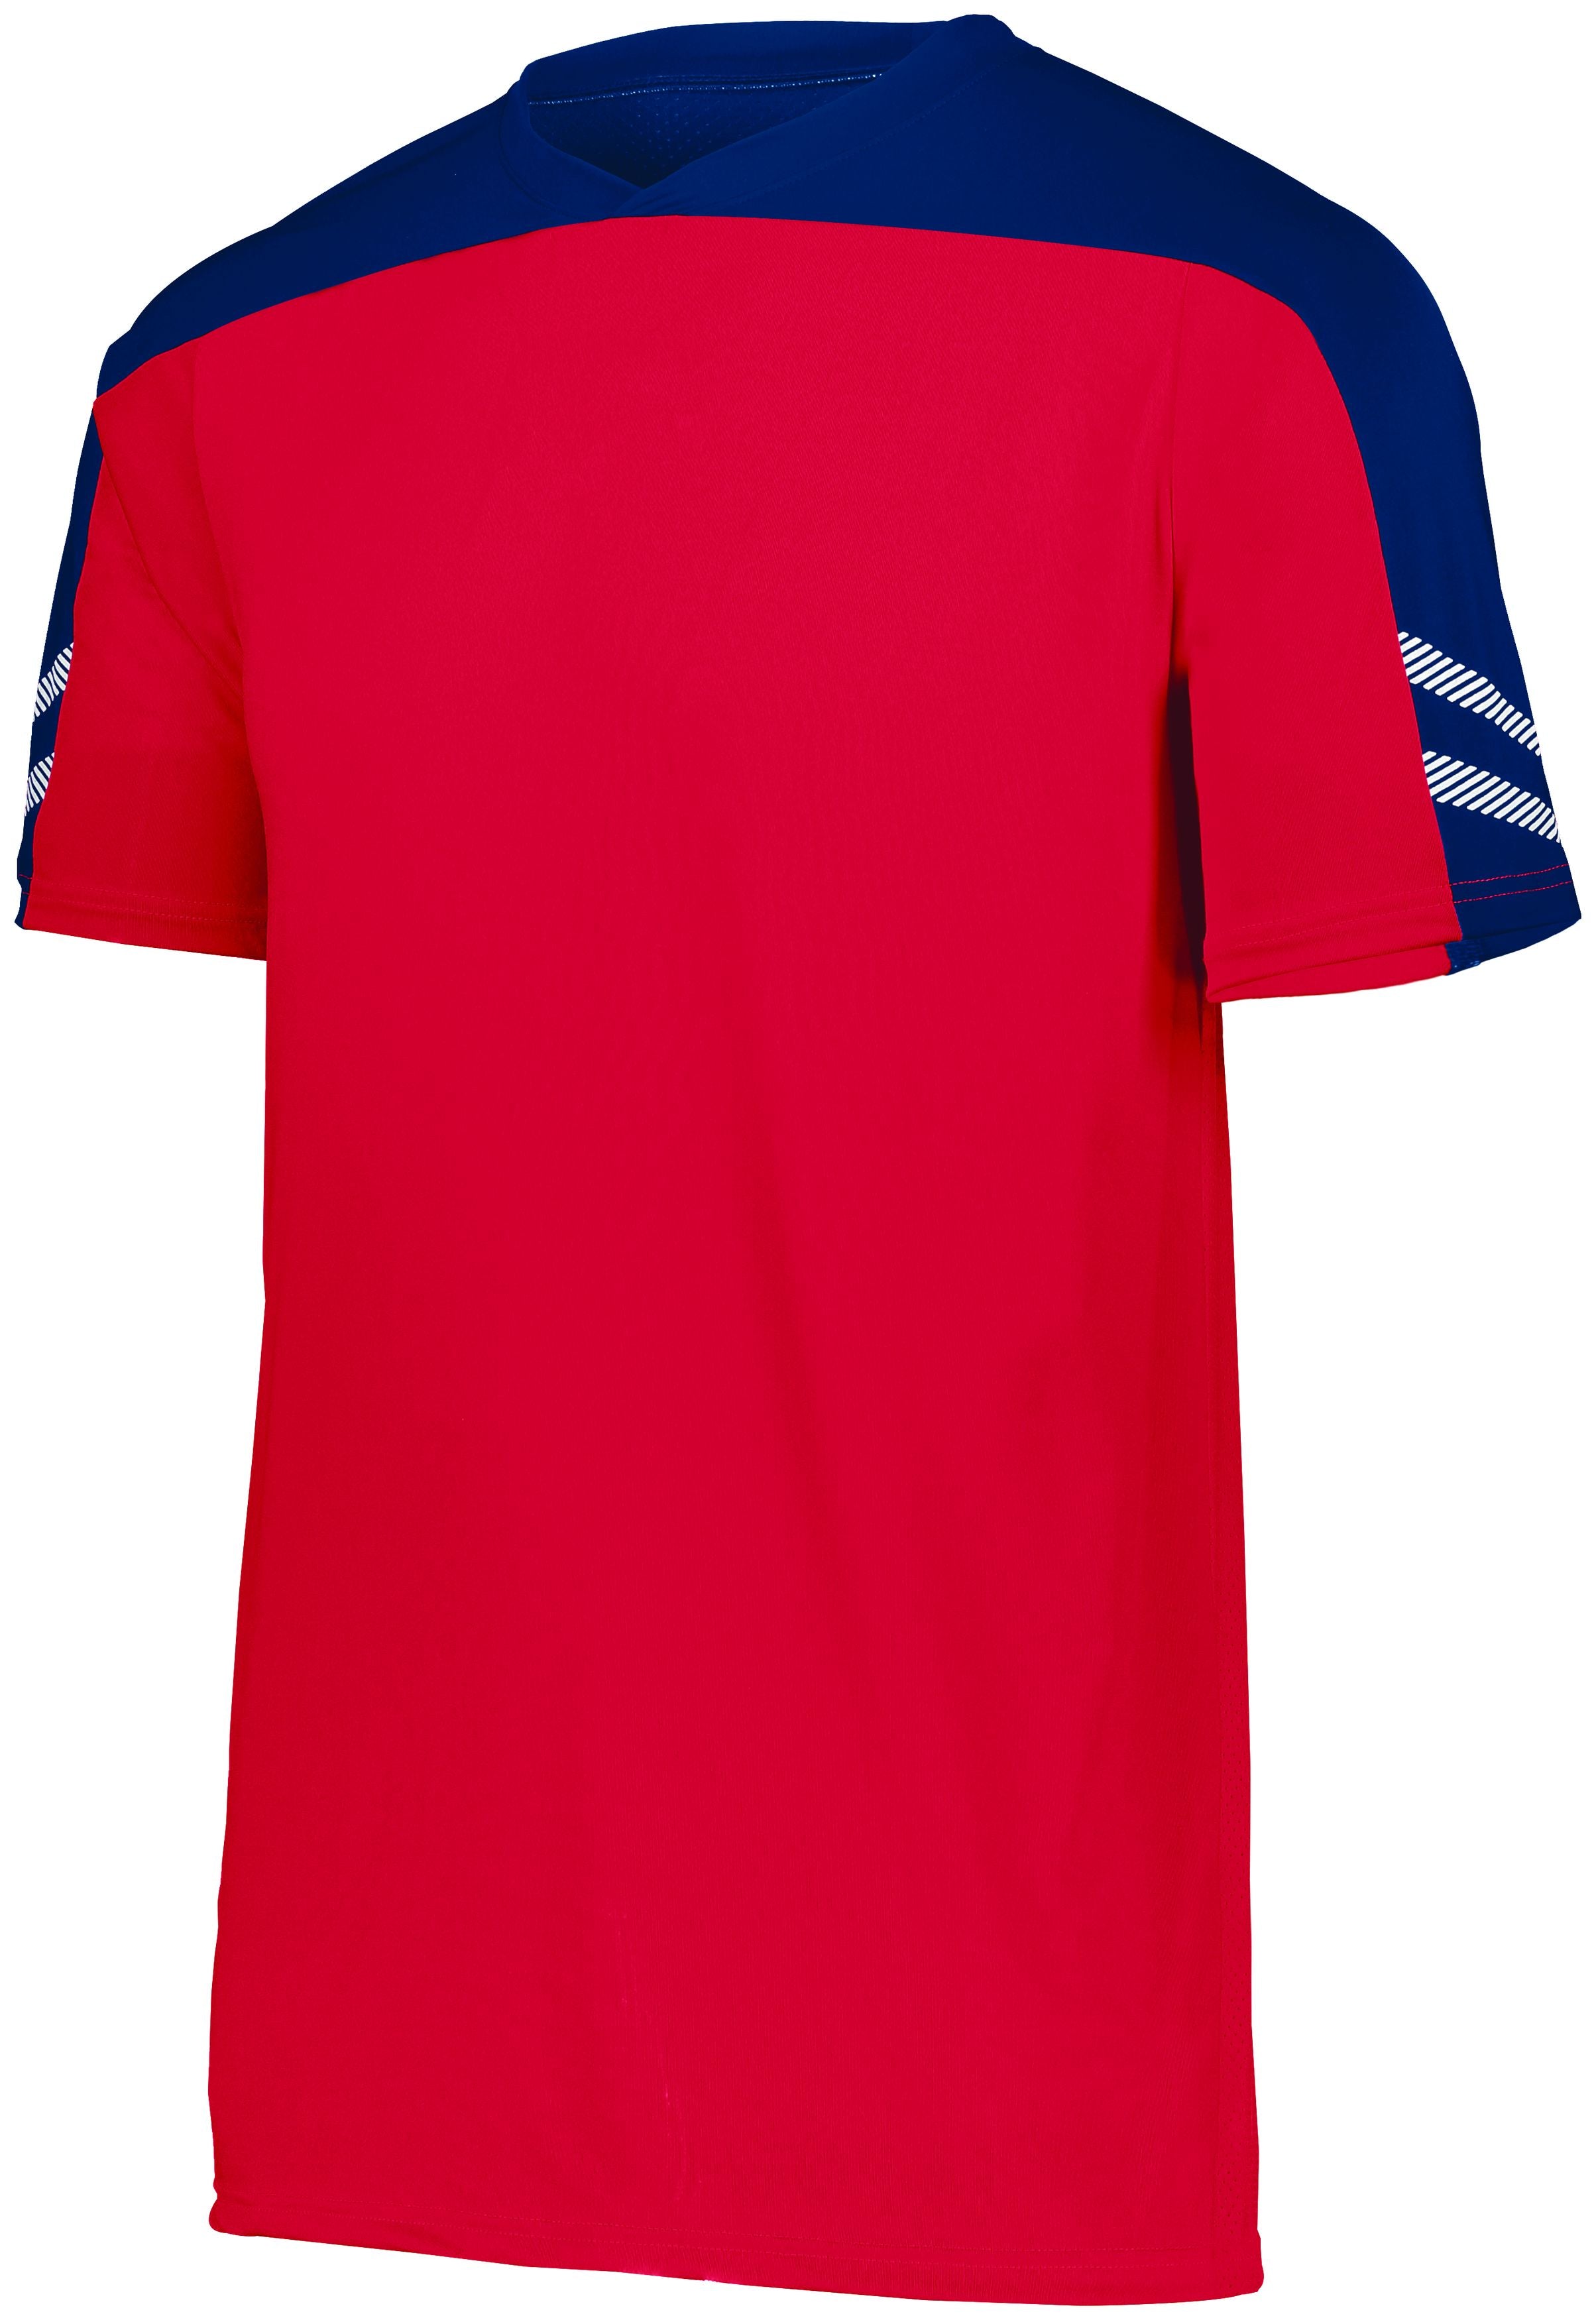 High 5 Anfield Soccer Jersey in Scarlet/Navy/White  -Part of the Adult, Adult-Jersey, High5-Products, Soccer, Shirts, All-Sports-1 product lines at KanaleyCreations.com